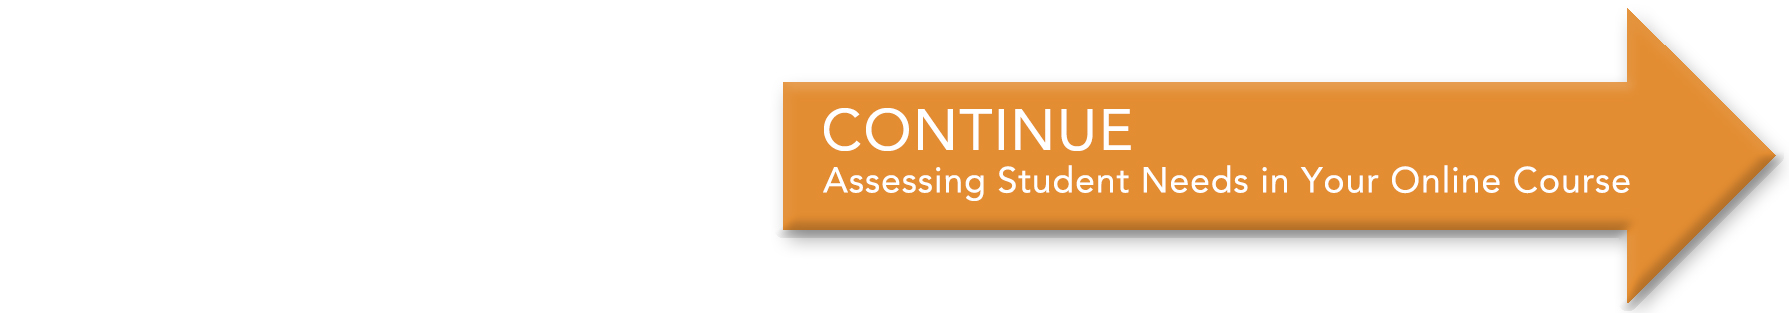 Assessing Student Needs in Your Online Course